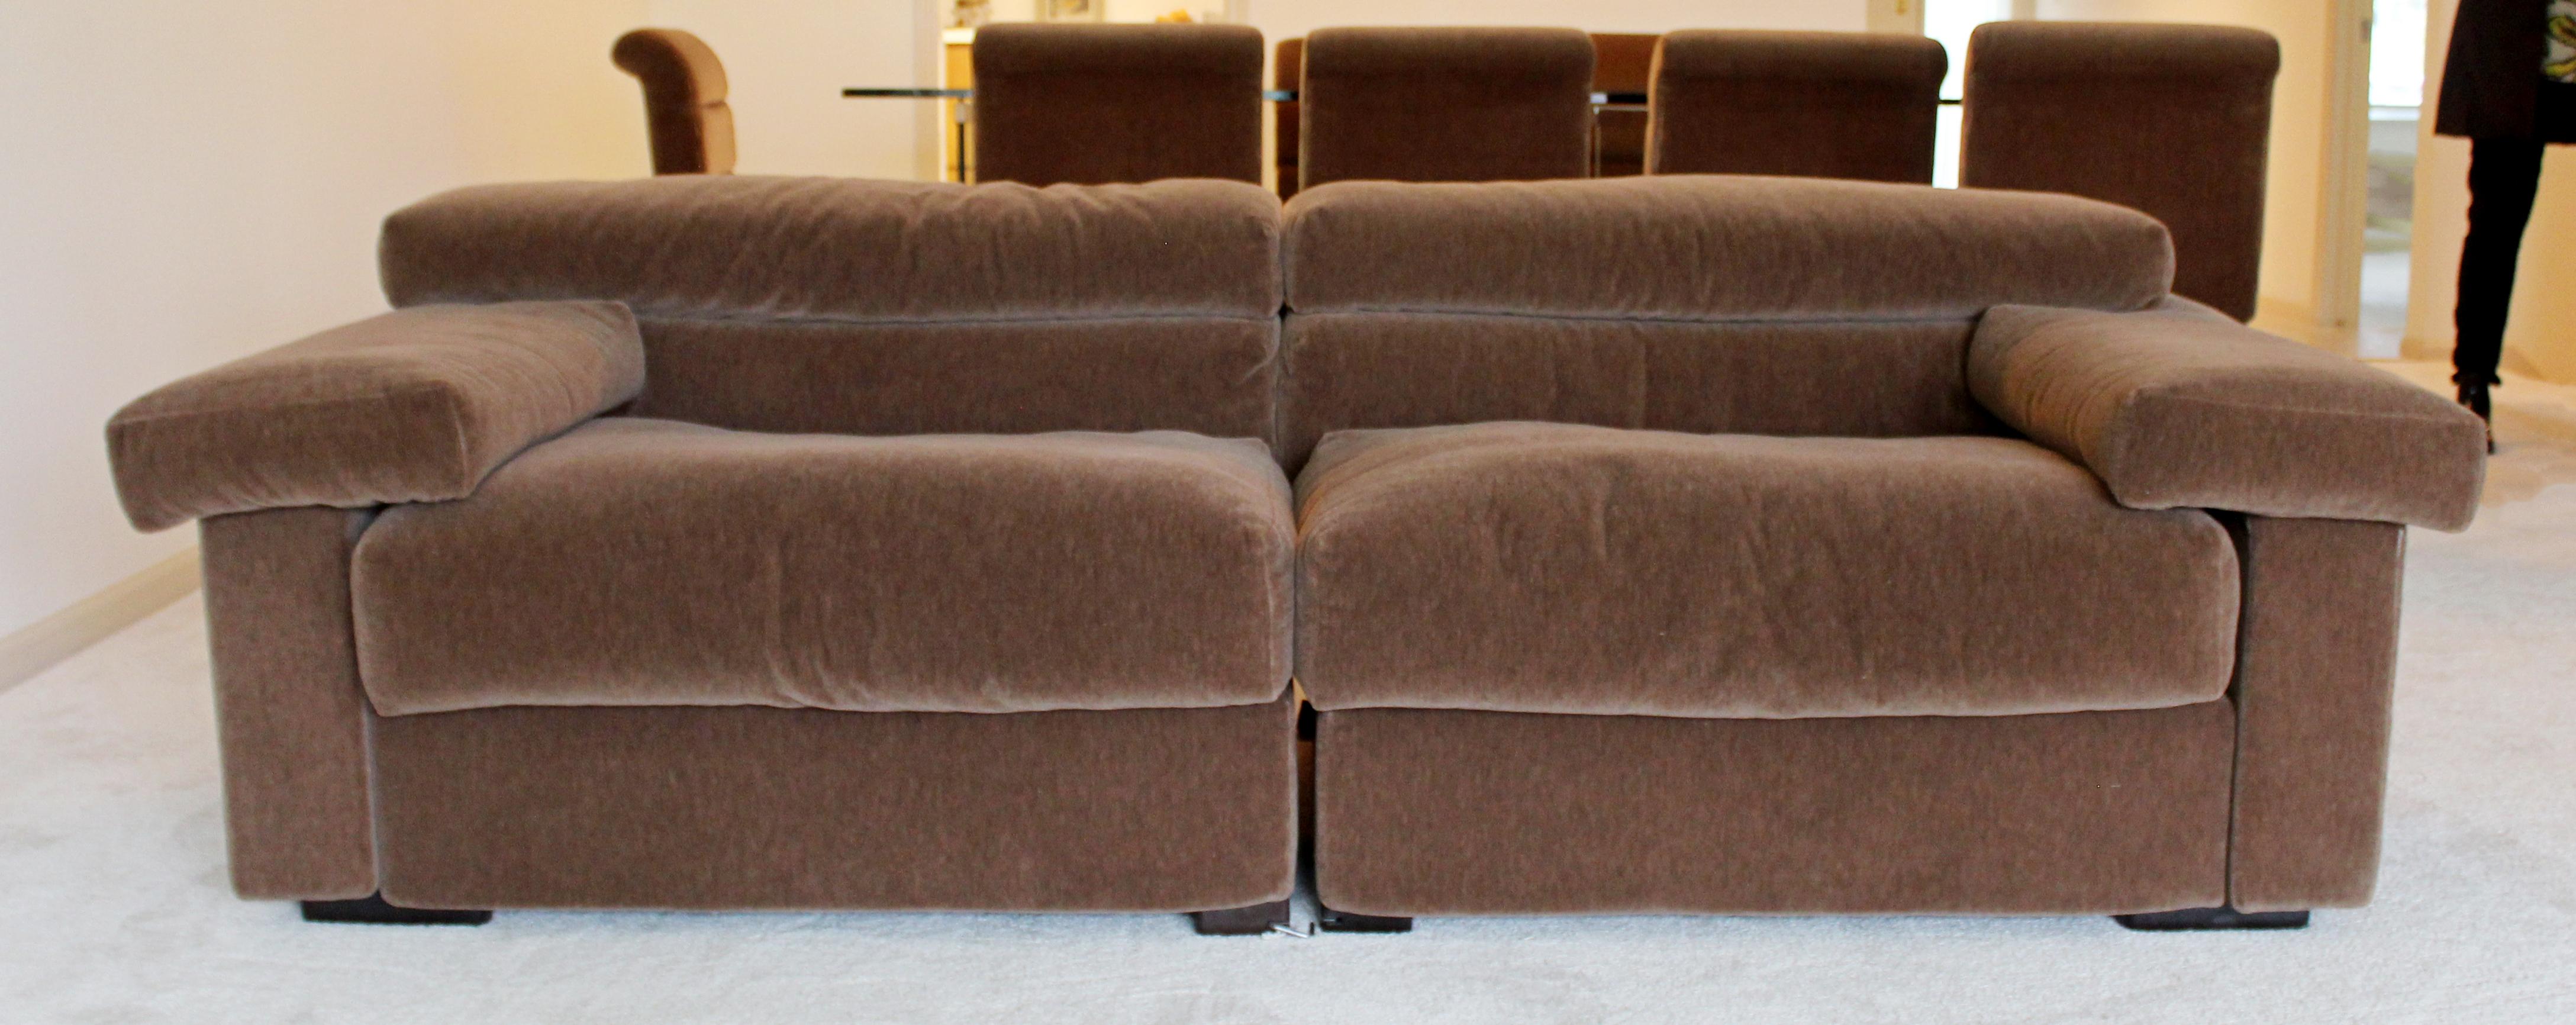 For your consideration is a remarkable pair of sectional sofas, with lush brown velvet upholstery, by Afra and Tobia Scarpa for B&B Italia, called The Erasmo collection, circa the 1970s. In excellent vintage condition. The dimensions of each of the